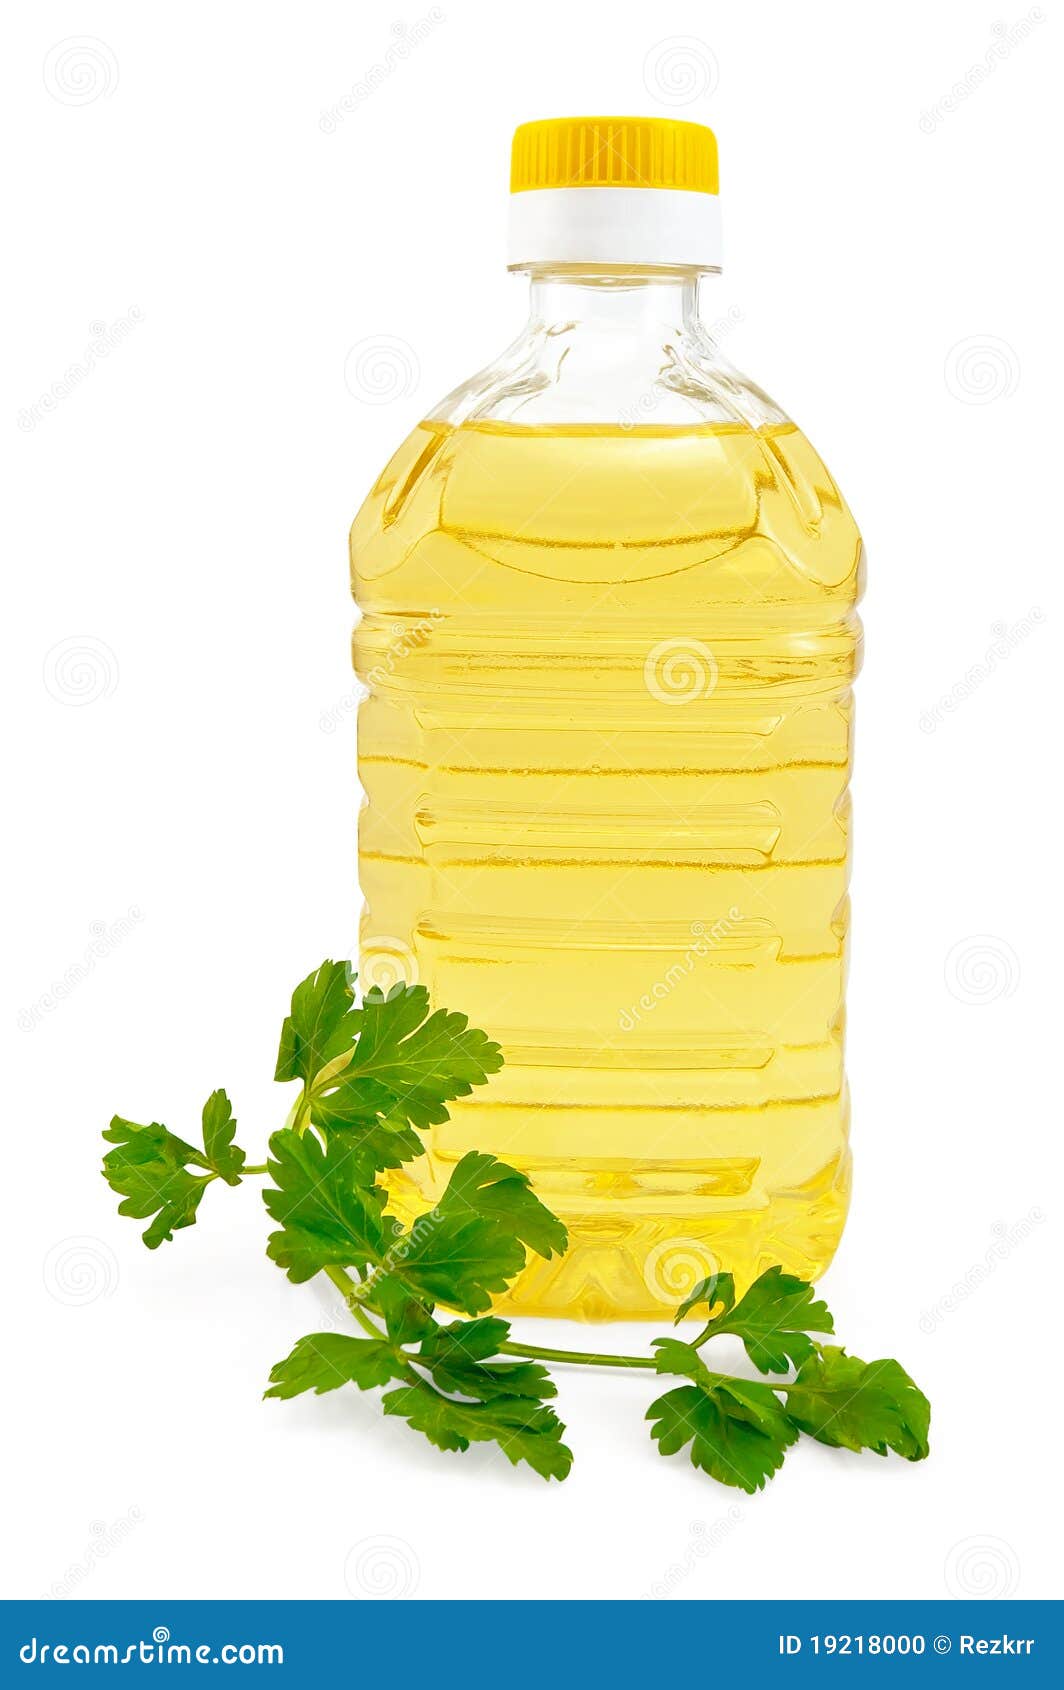 cooking oil clipart - photo #33